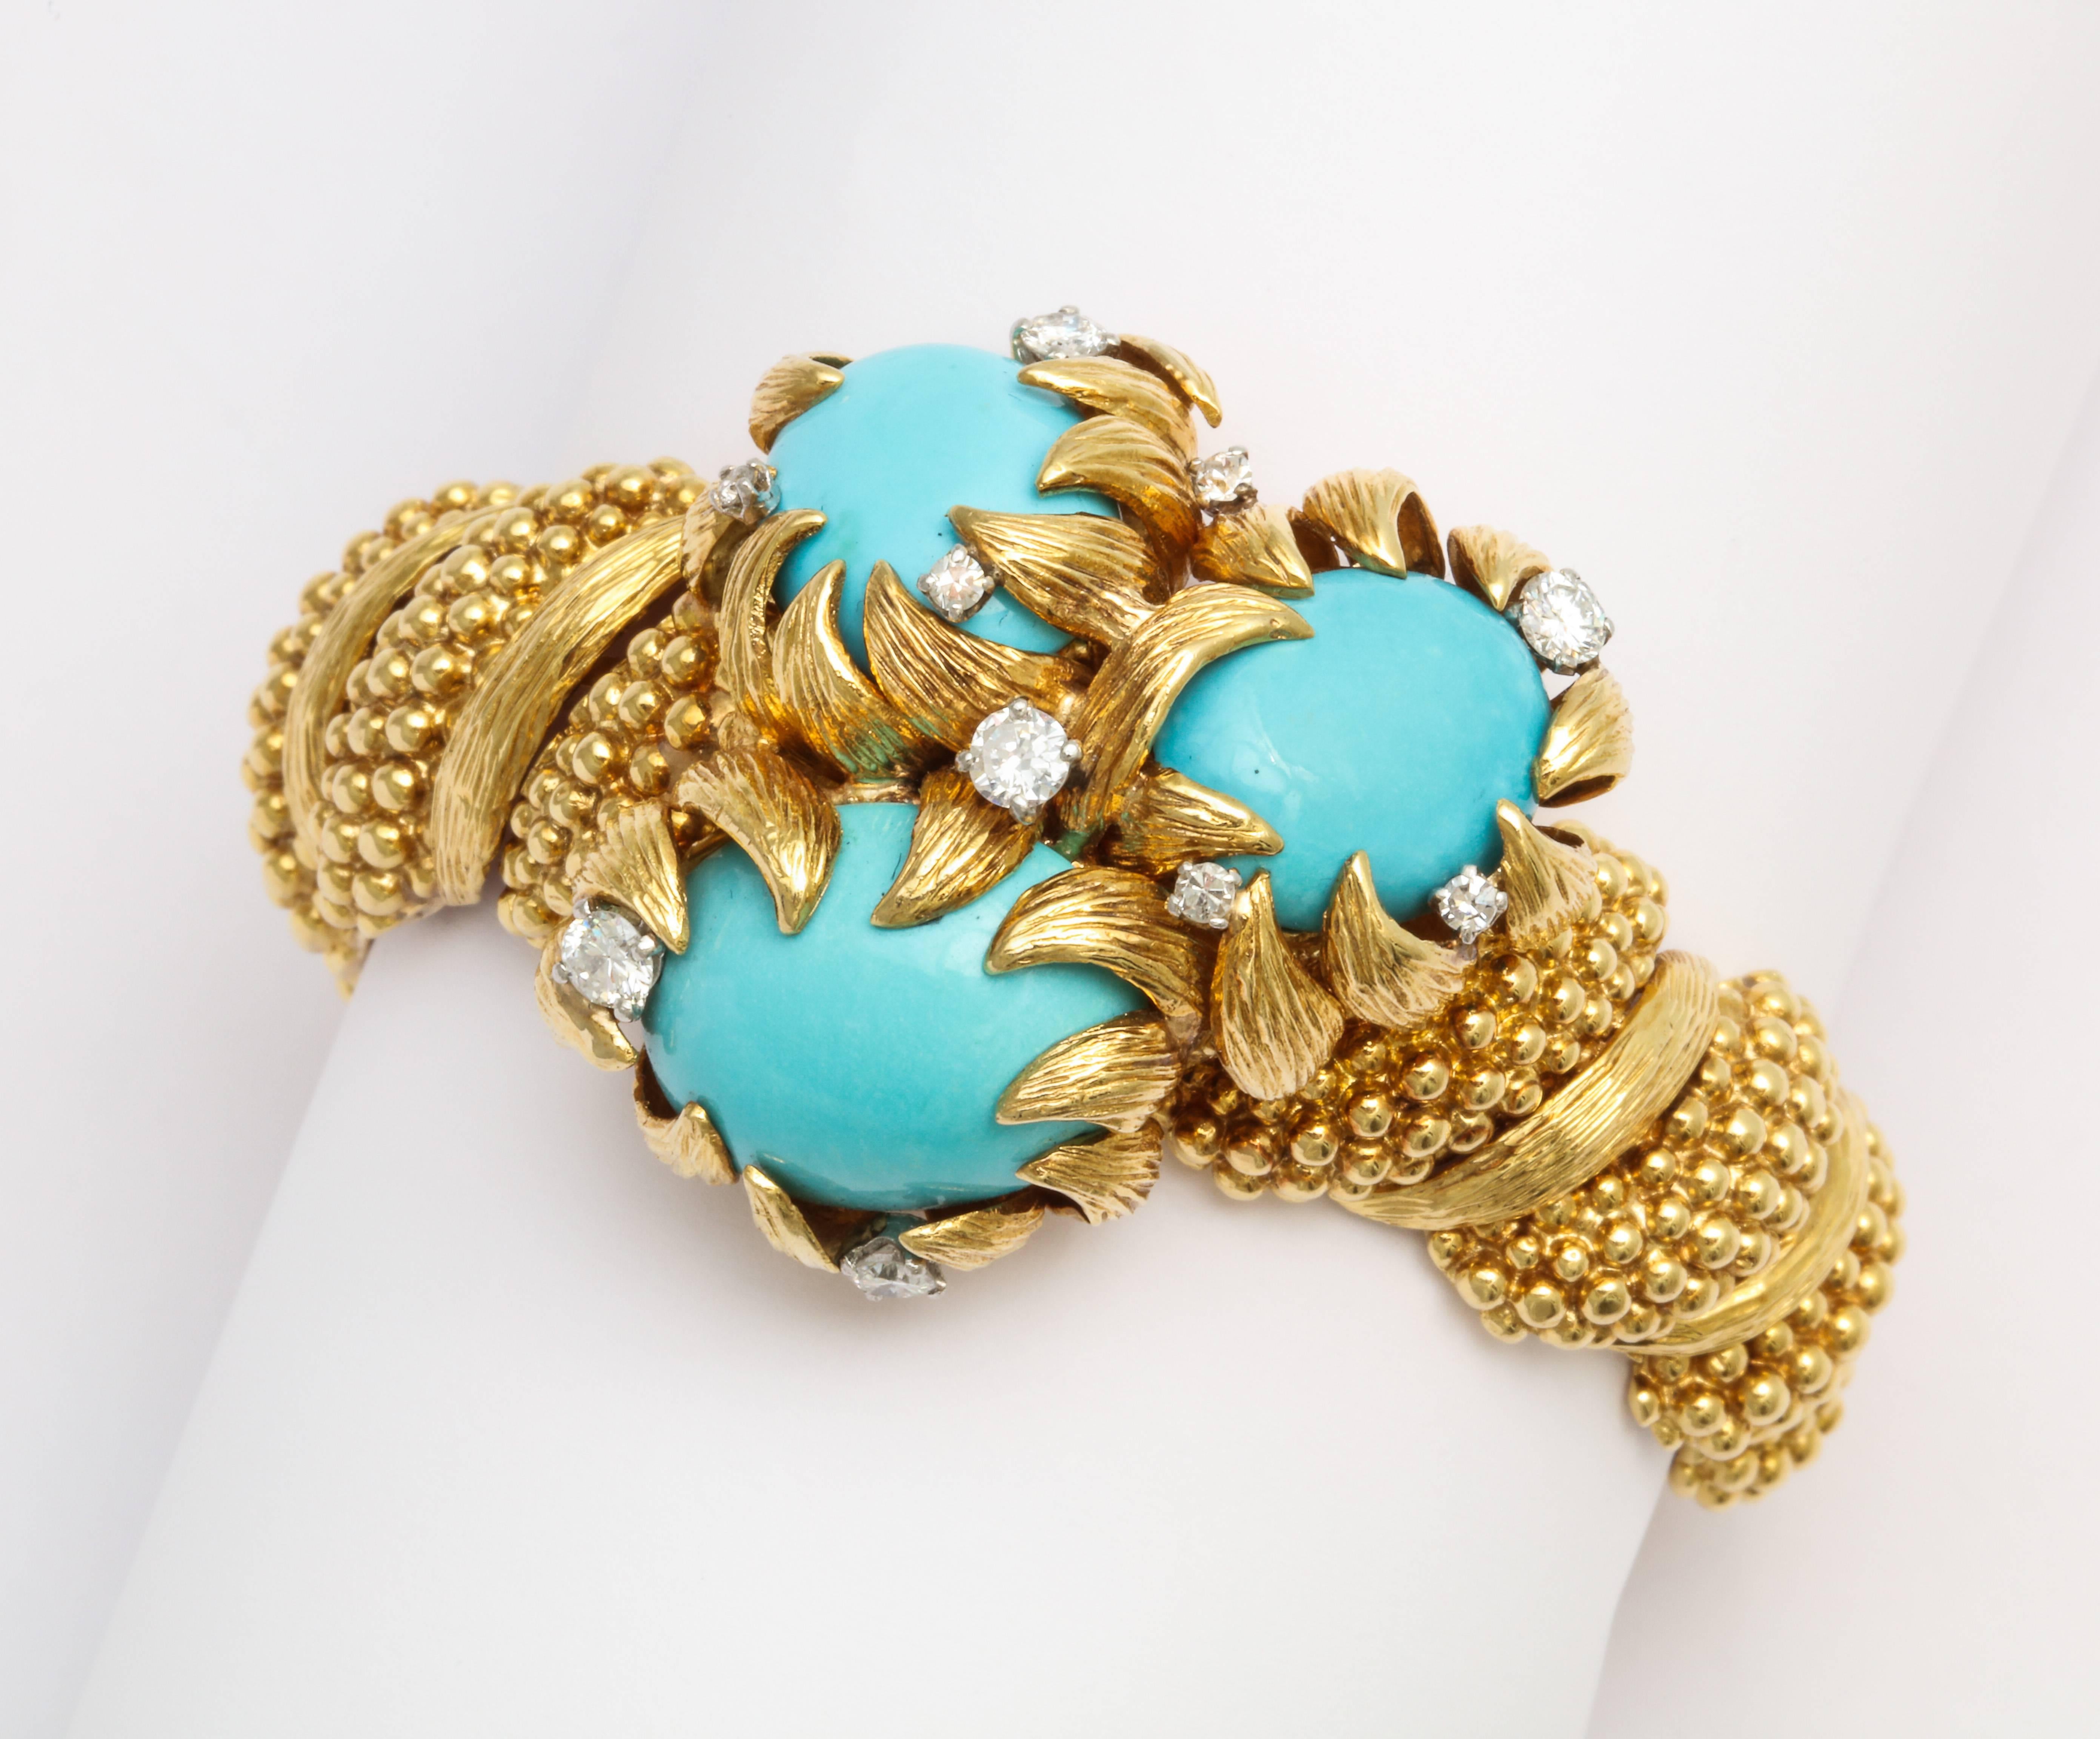 David Webb Turquoise Diamond Bracelet

3 Turquoise weigh approx 45 carats 

Set in 18 Karat yellow beaded and textured gold

Signed Webb